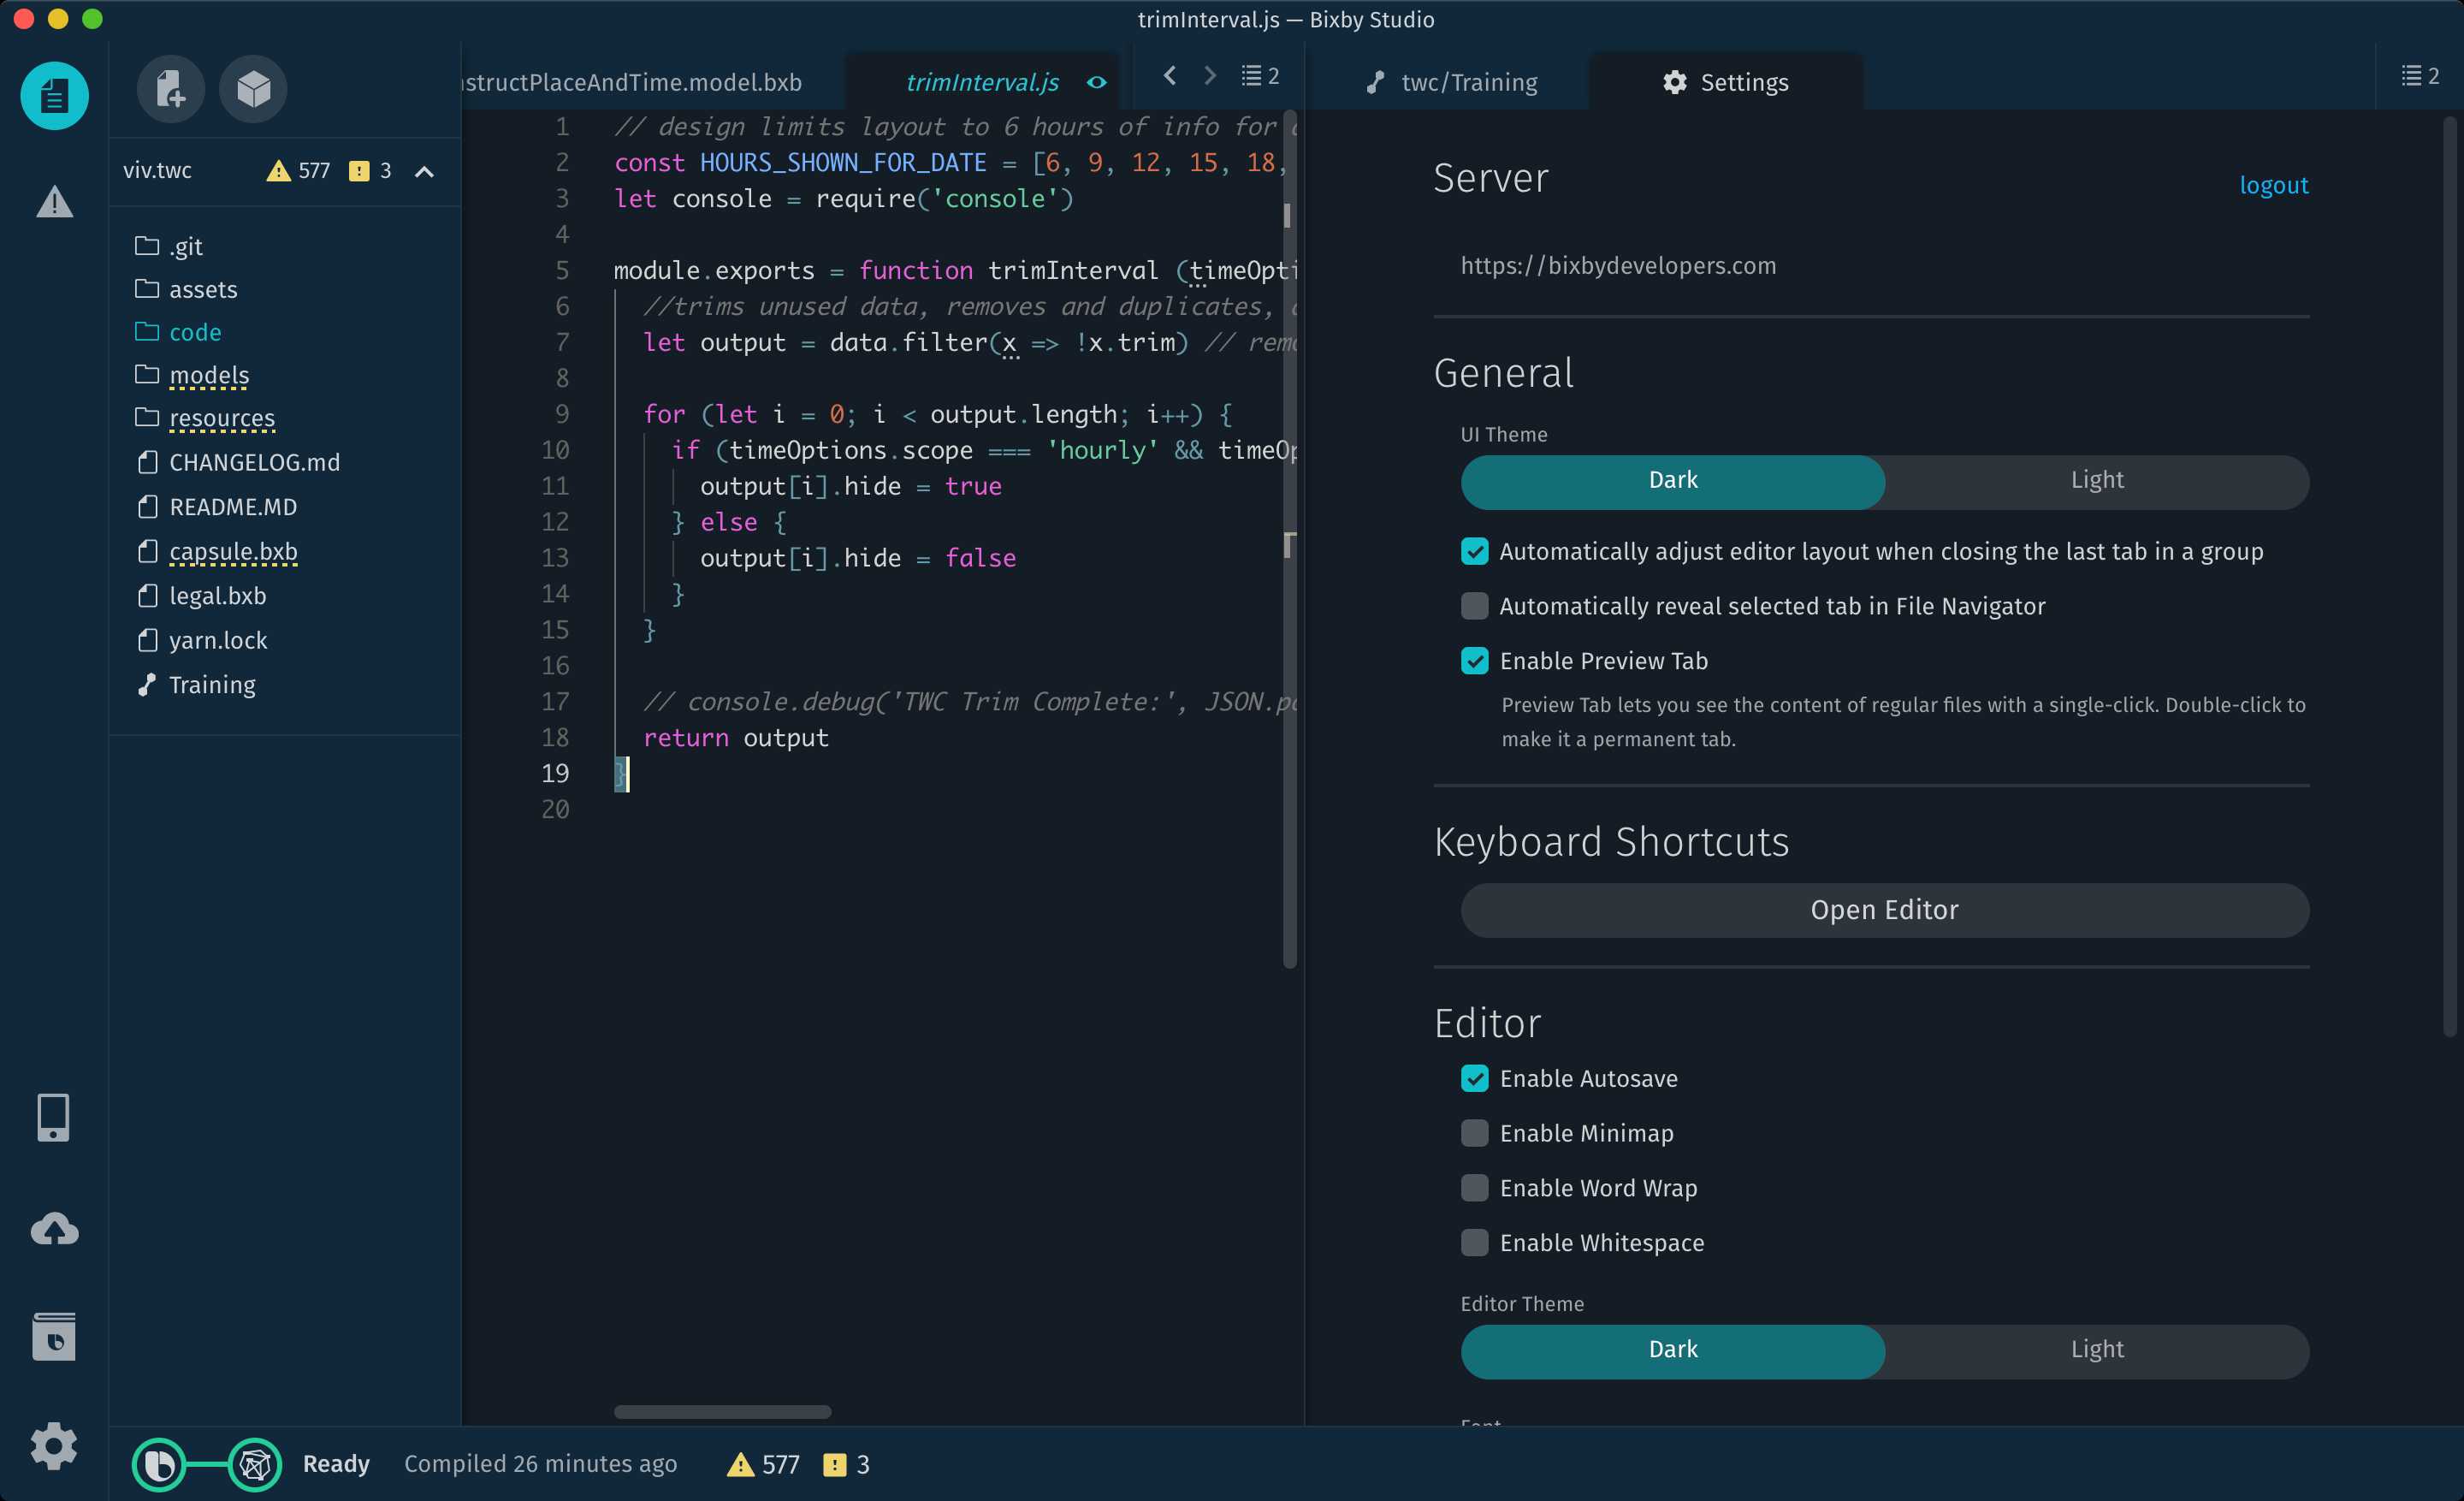 Screenshot of the editor split view with a JavaScript file on the left and the settings pane on the right.